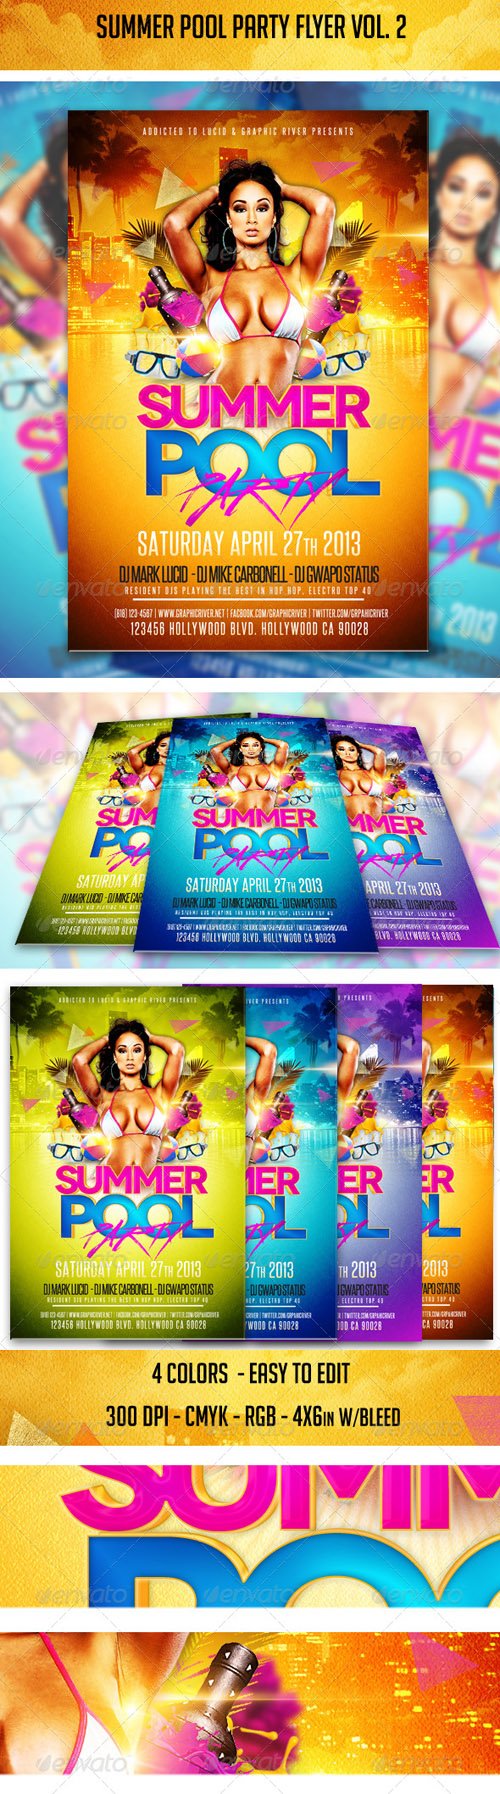 Graphicriver - Summer Pool Party Flyer Vol. 2 4166537